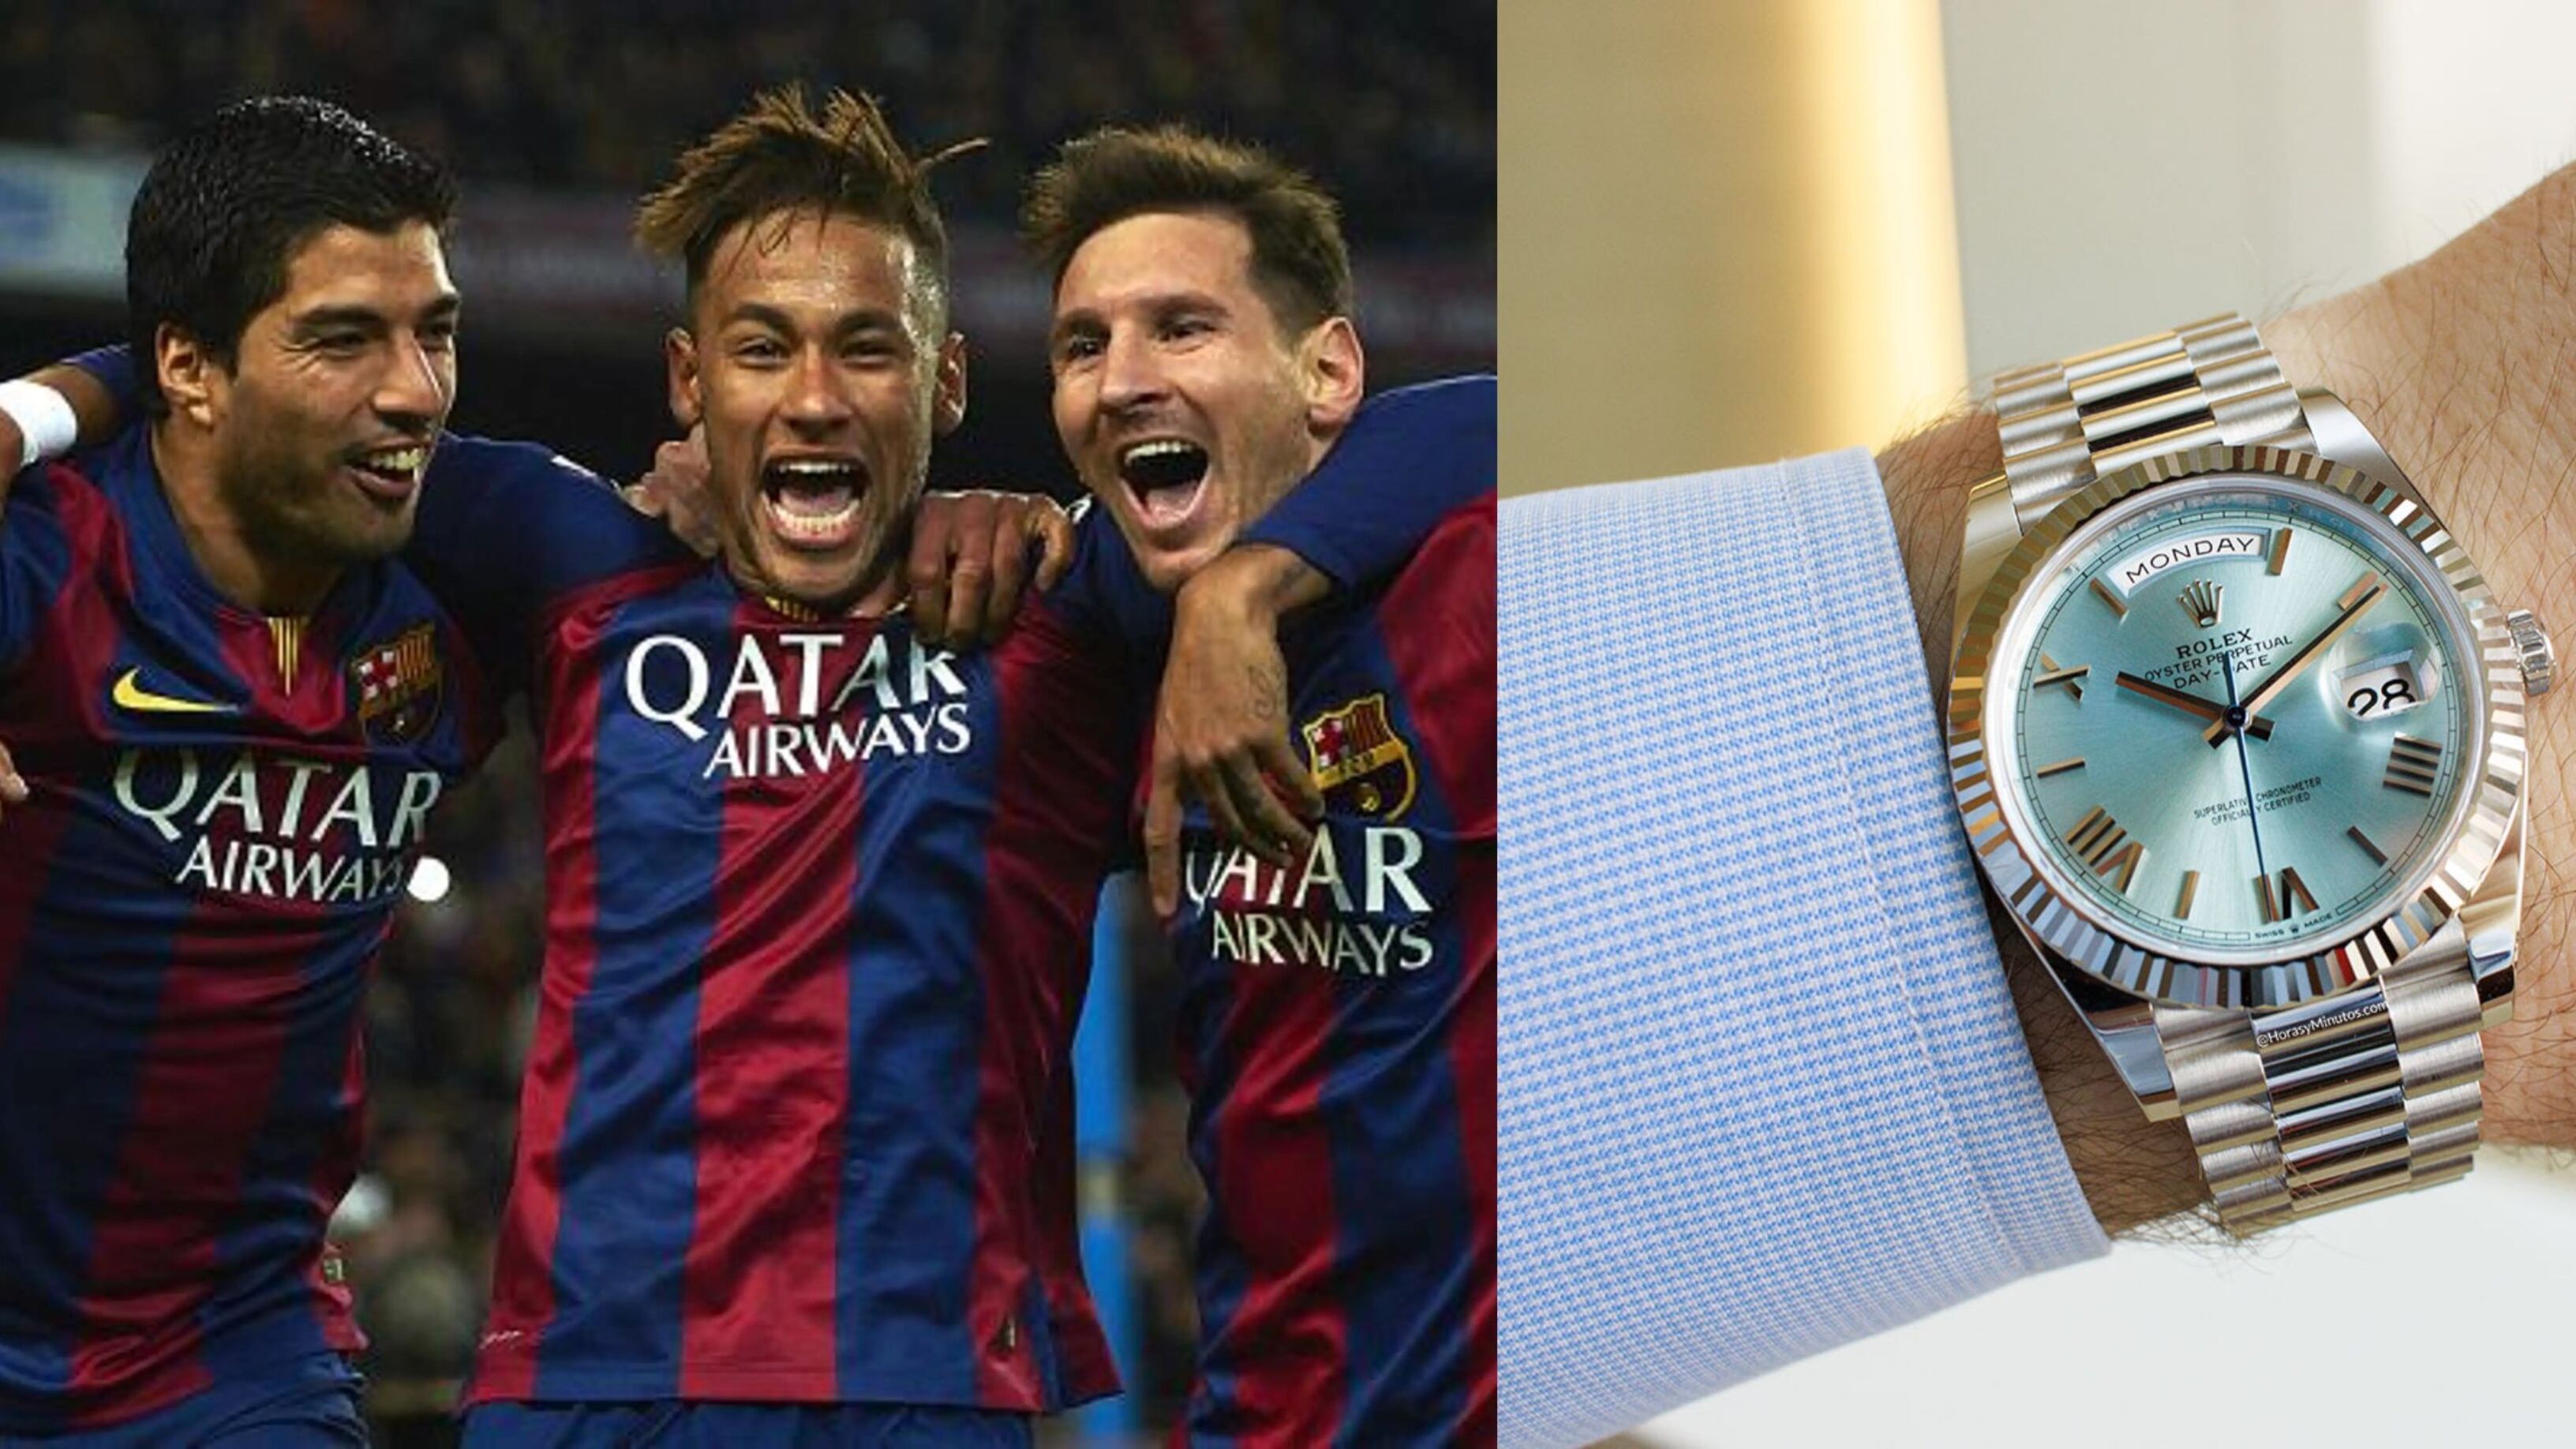 He won a World Cup and a Champions League with Messi, now he sells luxury watches for money